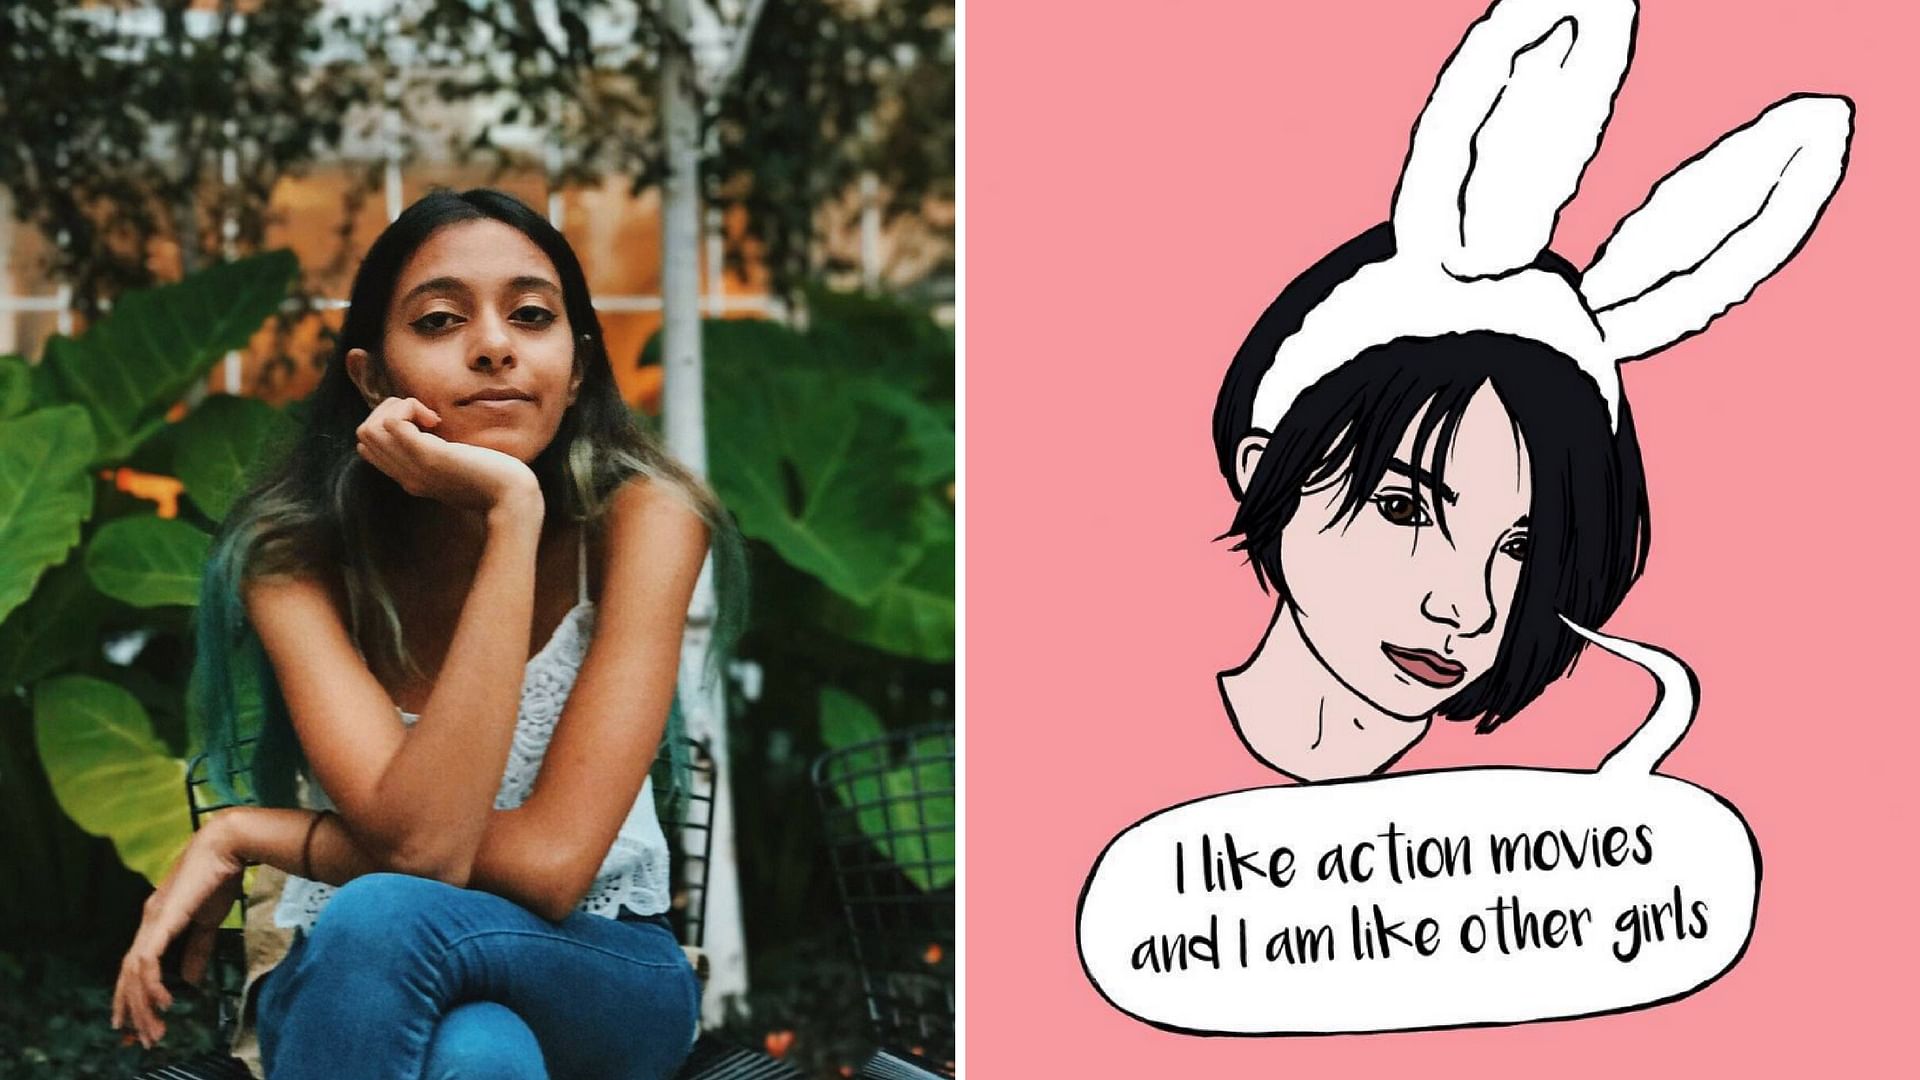 Illustrator Tara Anand is helming an Insta project called ‘I’m Like Other Girls’.